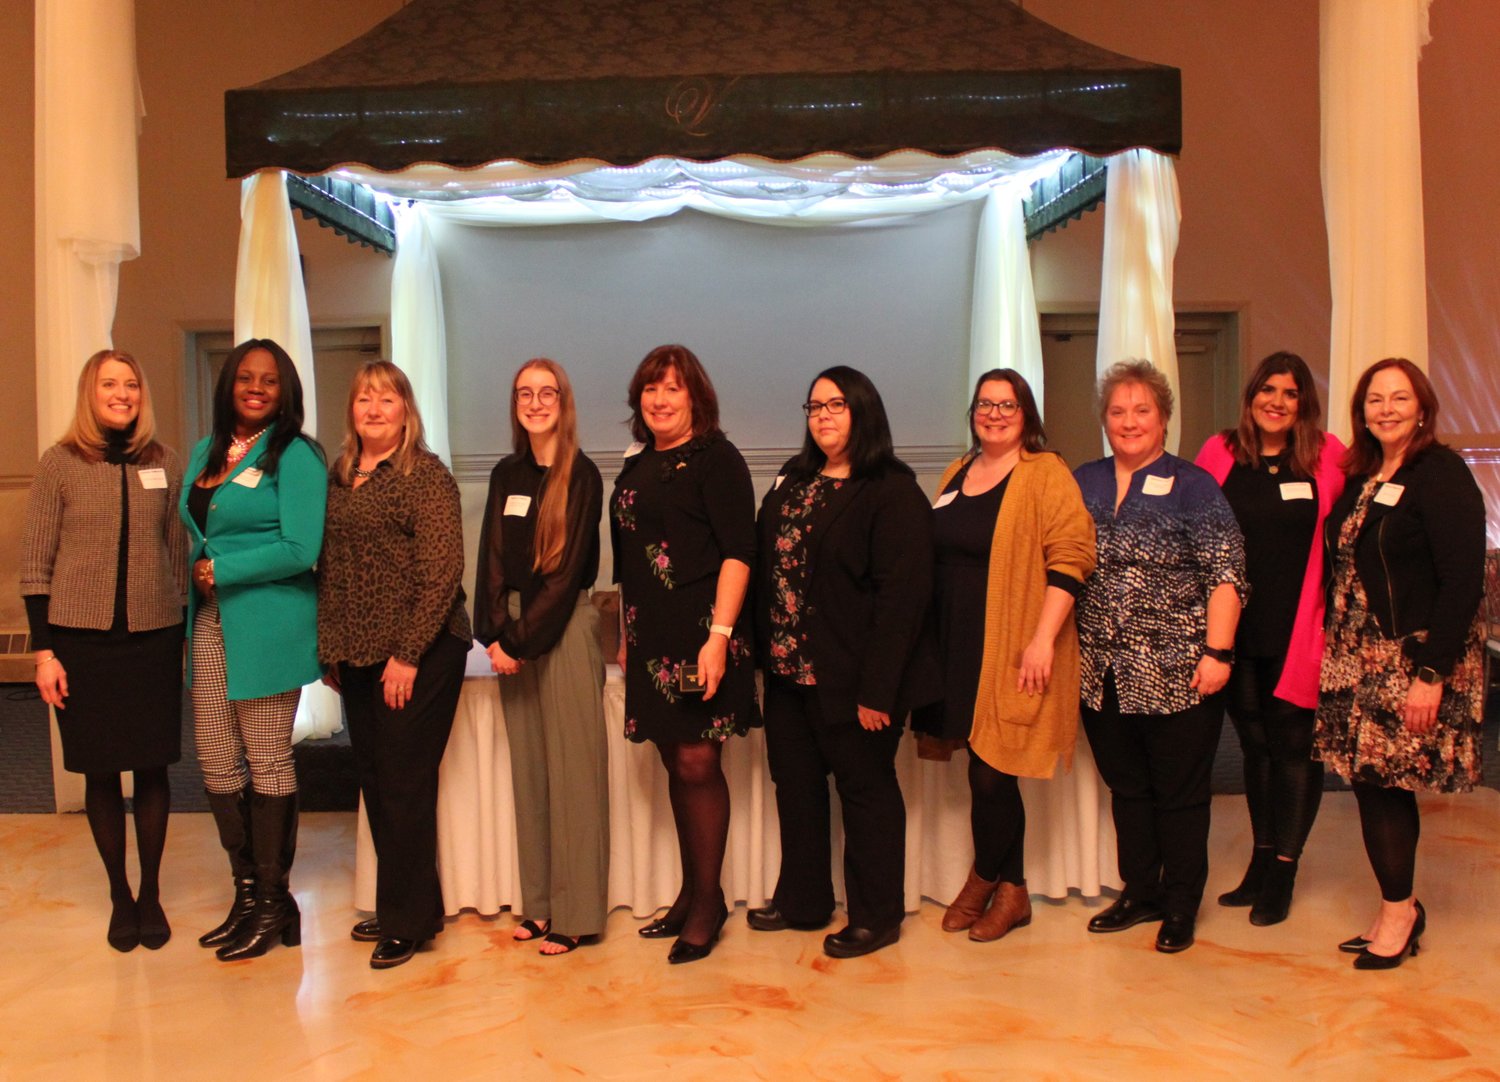 HONOREES UNVEILED — The YWCA Mohawk Valley announced its honorees for its annual Salute to Outstanding Women on Thursday. From left: YWCA MV Board President Jen DeWeerth; Oneka Roach-Campbell; Dawn Roller; Sophia O’Neill;  Assemblywoman Marianne Buttenschon; Amy Jennings; Juli Webster; Natasha Homa; Danielle Padula; and YWCA MV CEO Dianne Stancato.